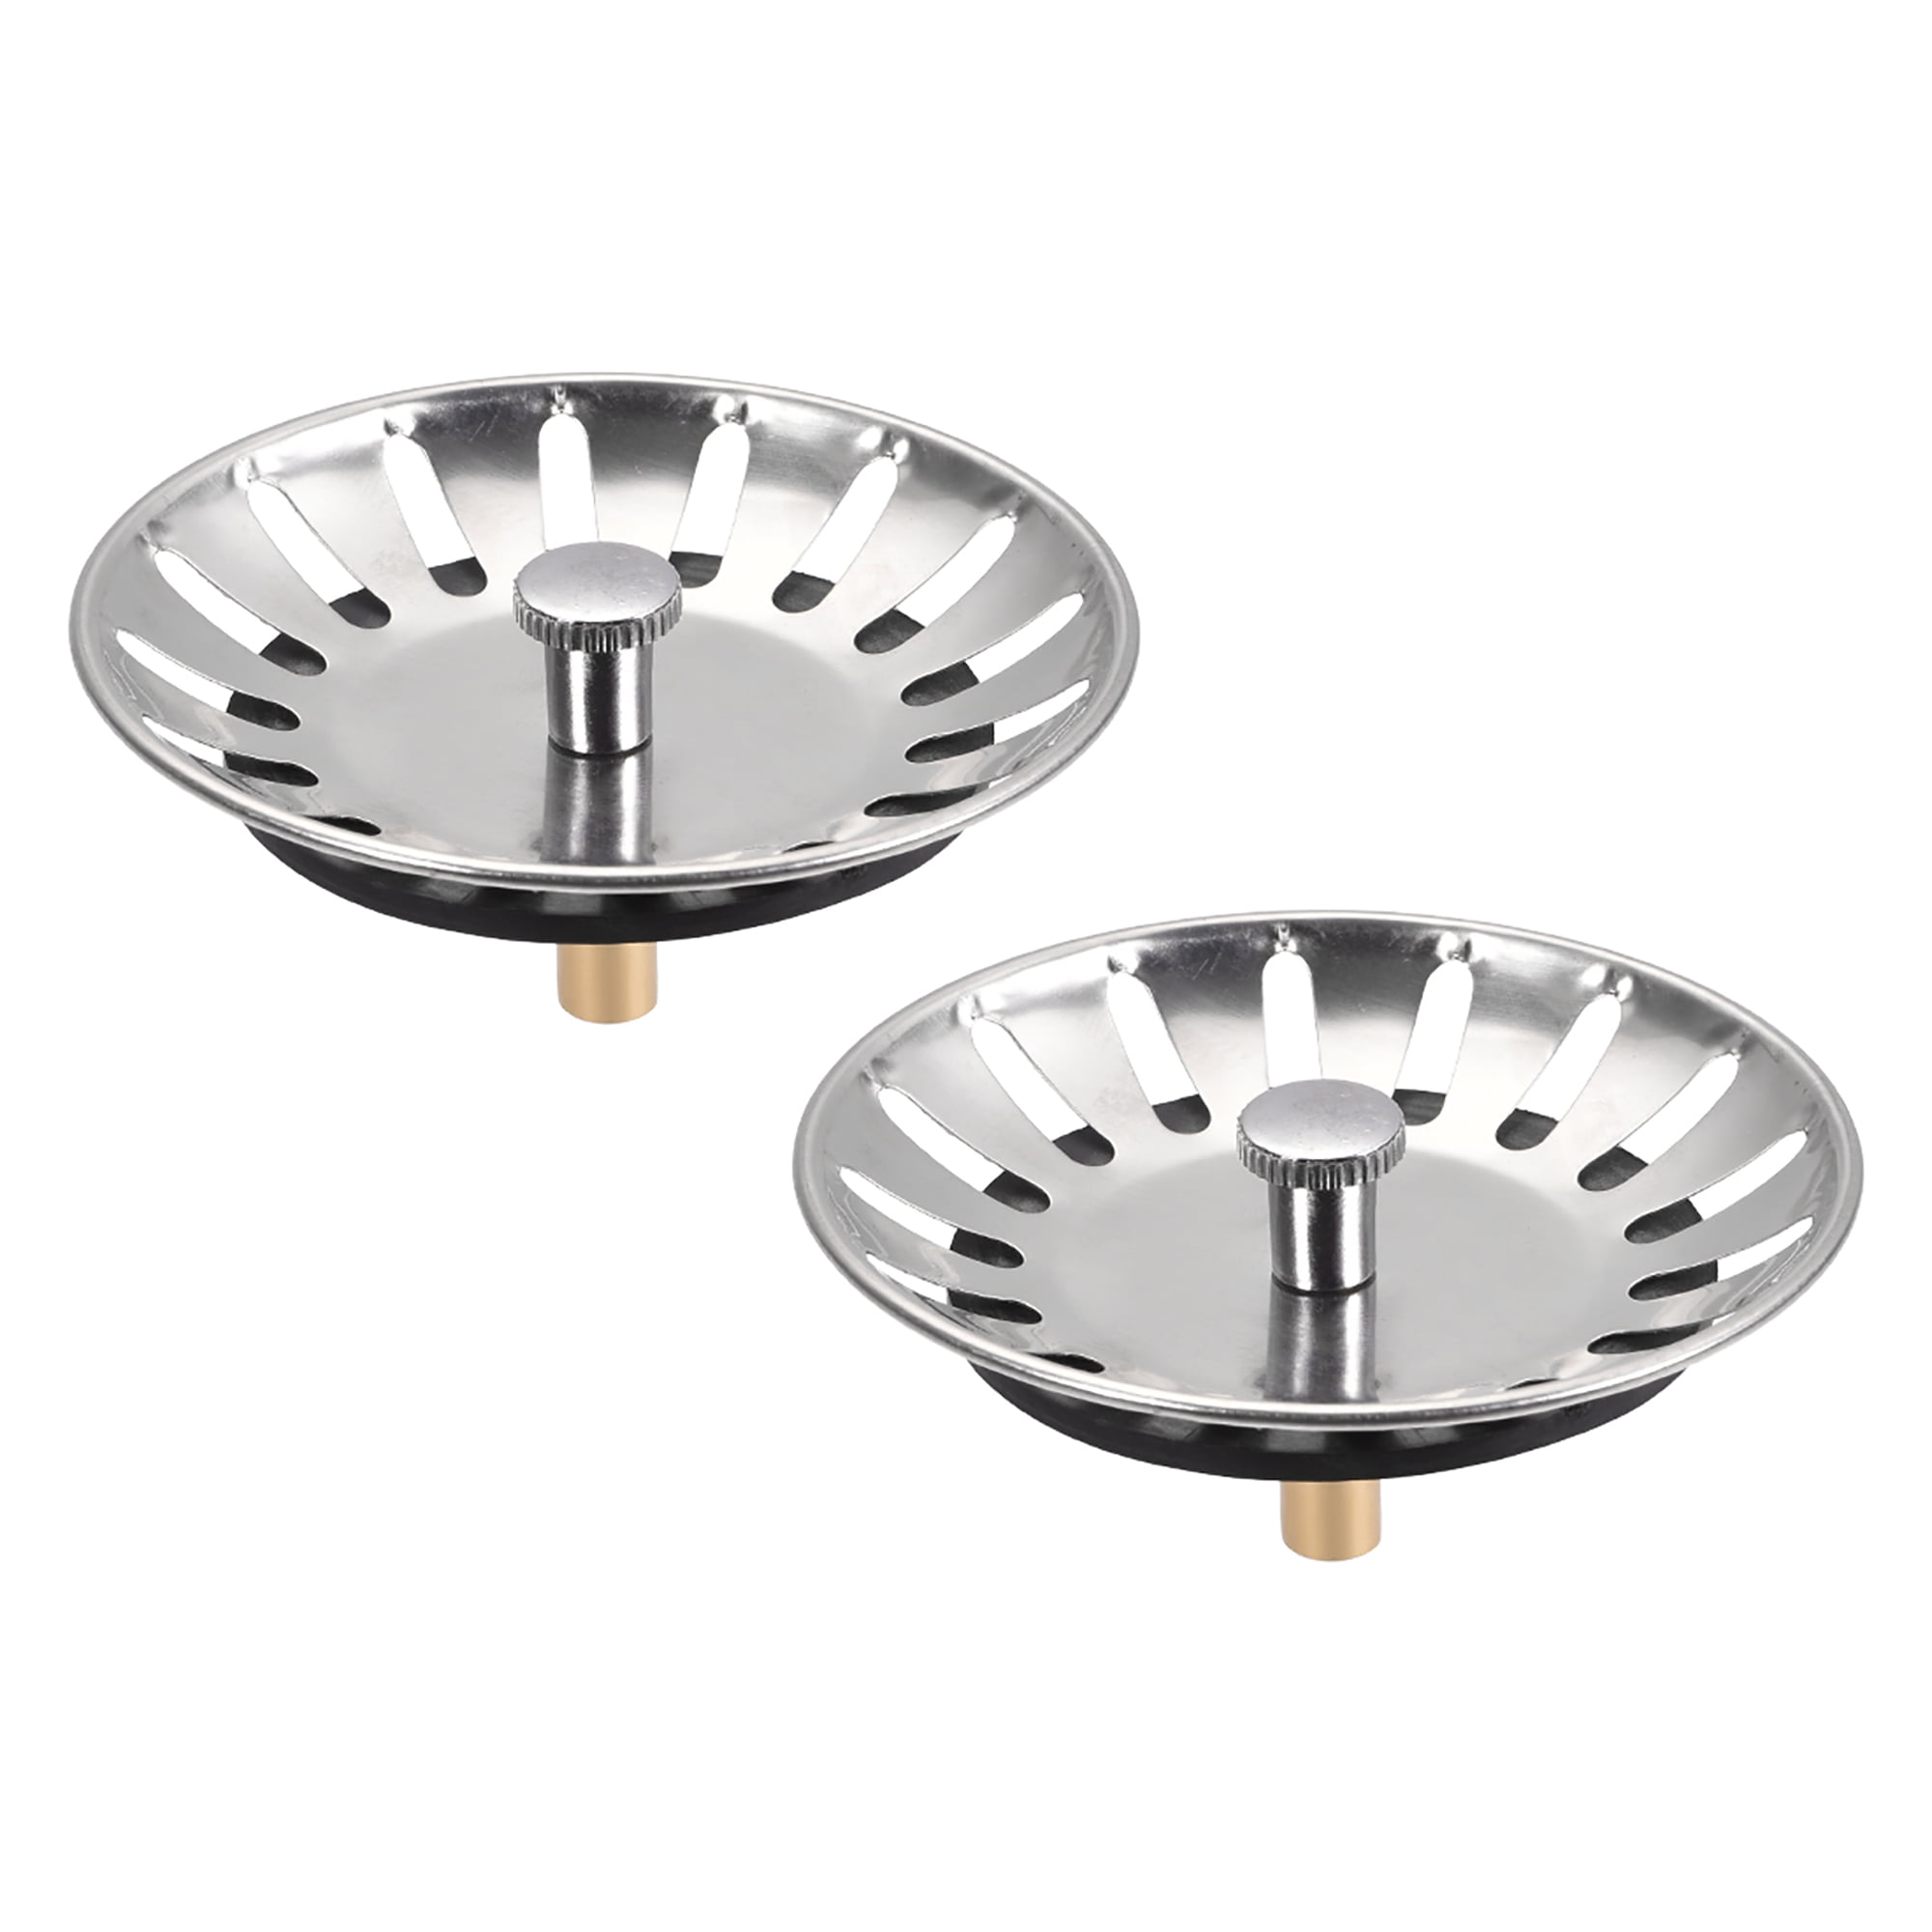 / Uxcell a11060700ux0120 Ltd Uxcell Stainless Steel Basket Sink Strainer Drain with Cover Dragonmarts Co 